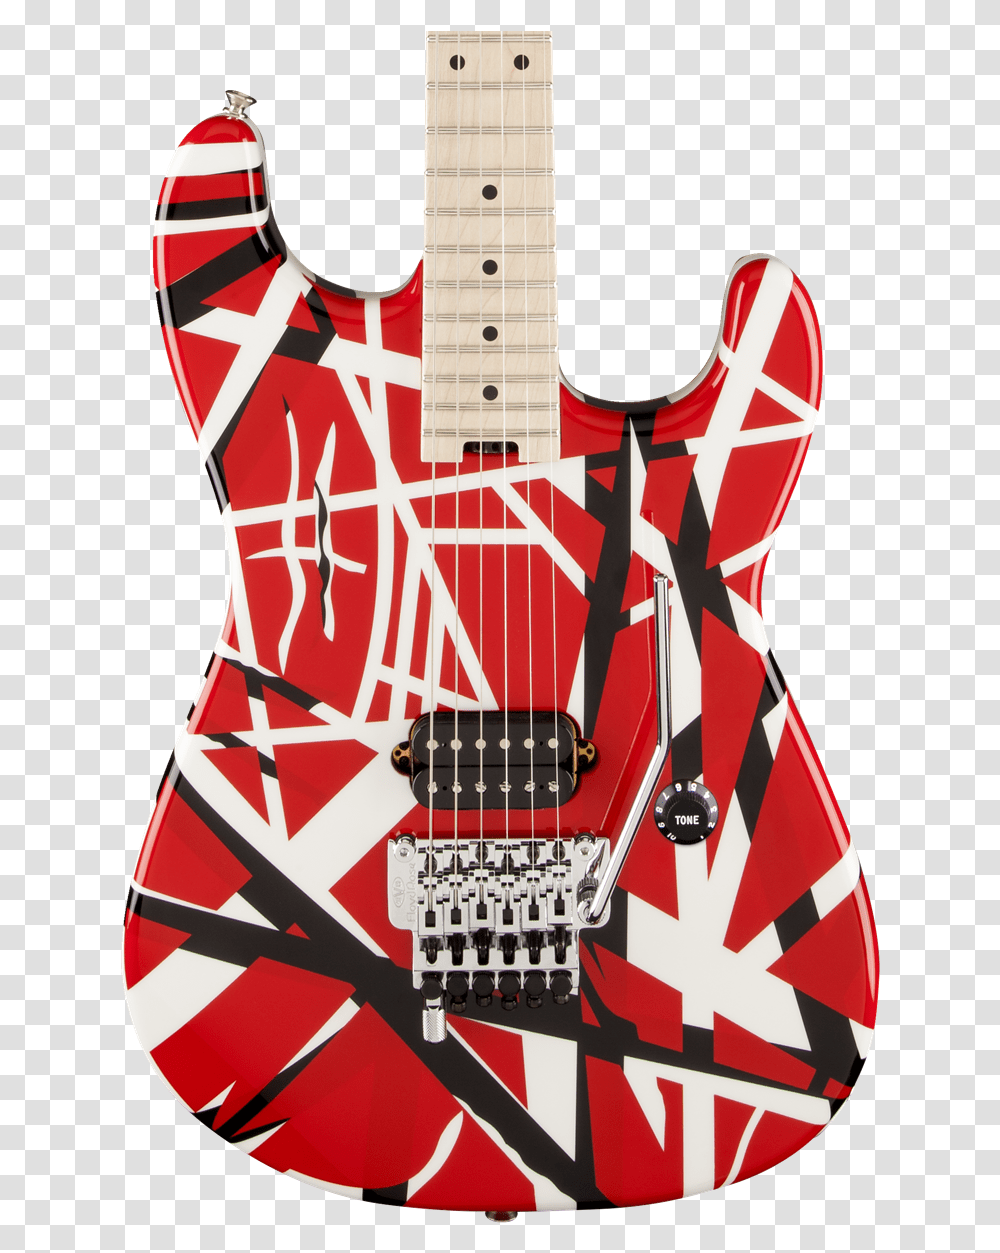 Red And Black Fender Evh Striped Series, Electric Guitar, Leisure Activities, Musical Instrument, Bass Guitar Transparent Png